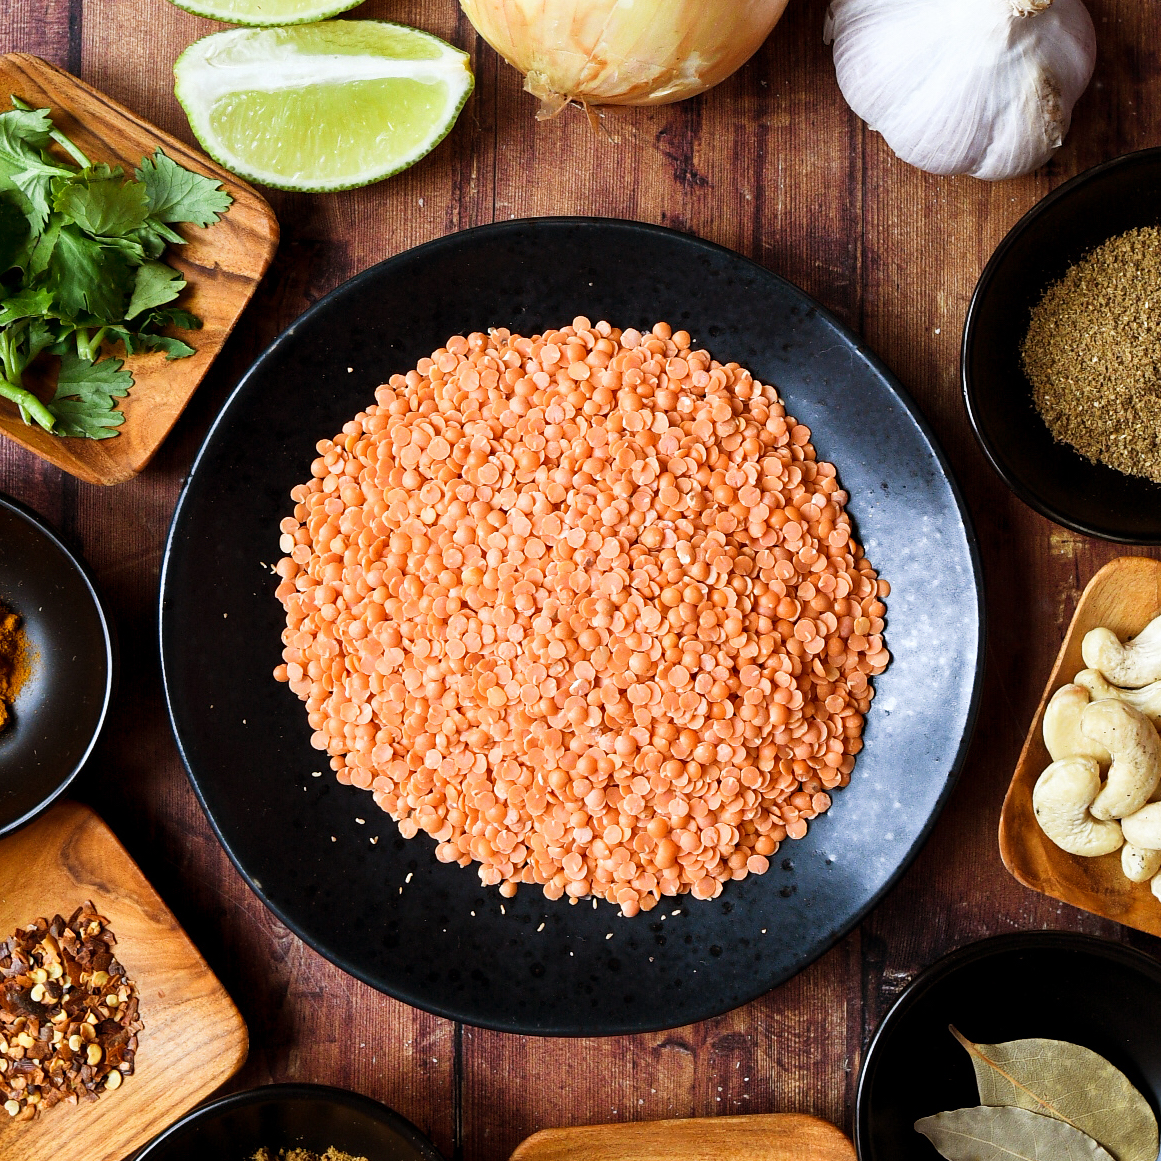 Top Reasons to Add Lentils to Your Diet